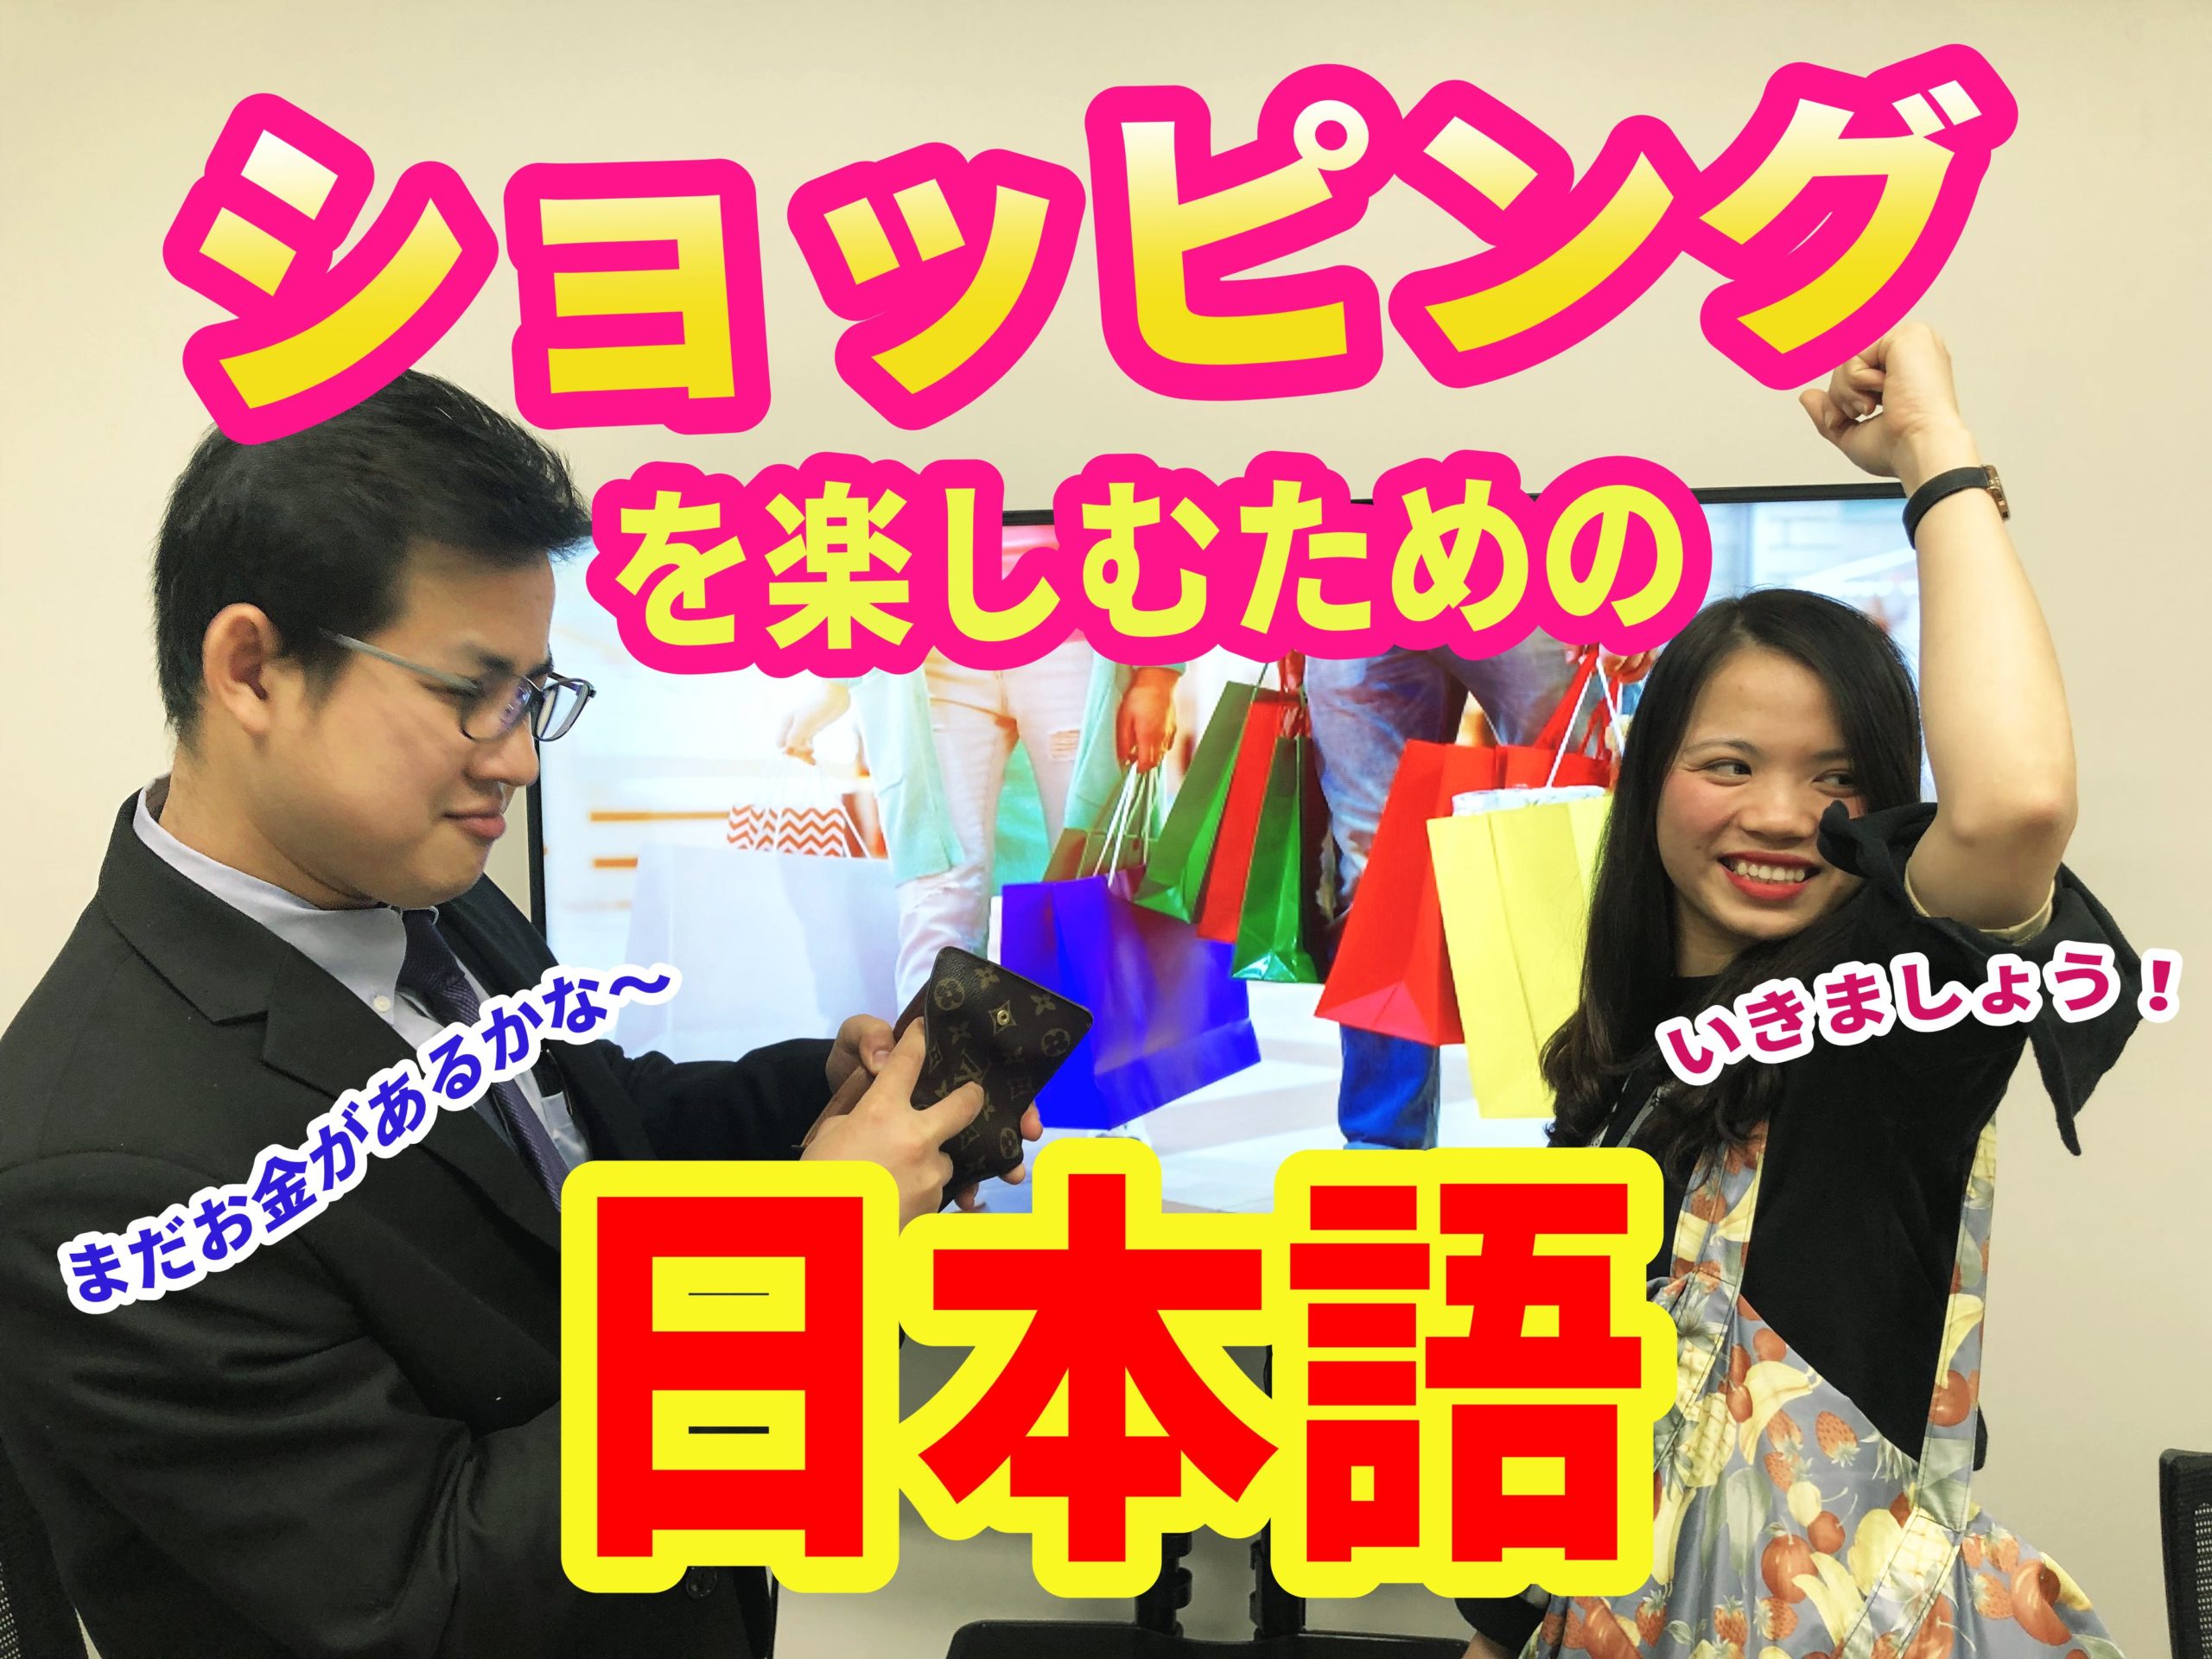 Let’s Remember This: How to enjoy Shopping in Japanese